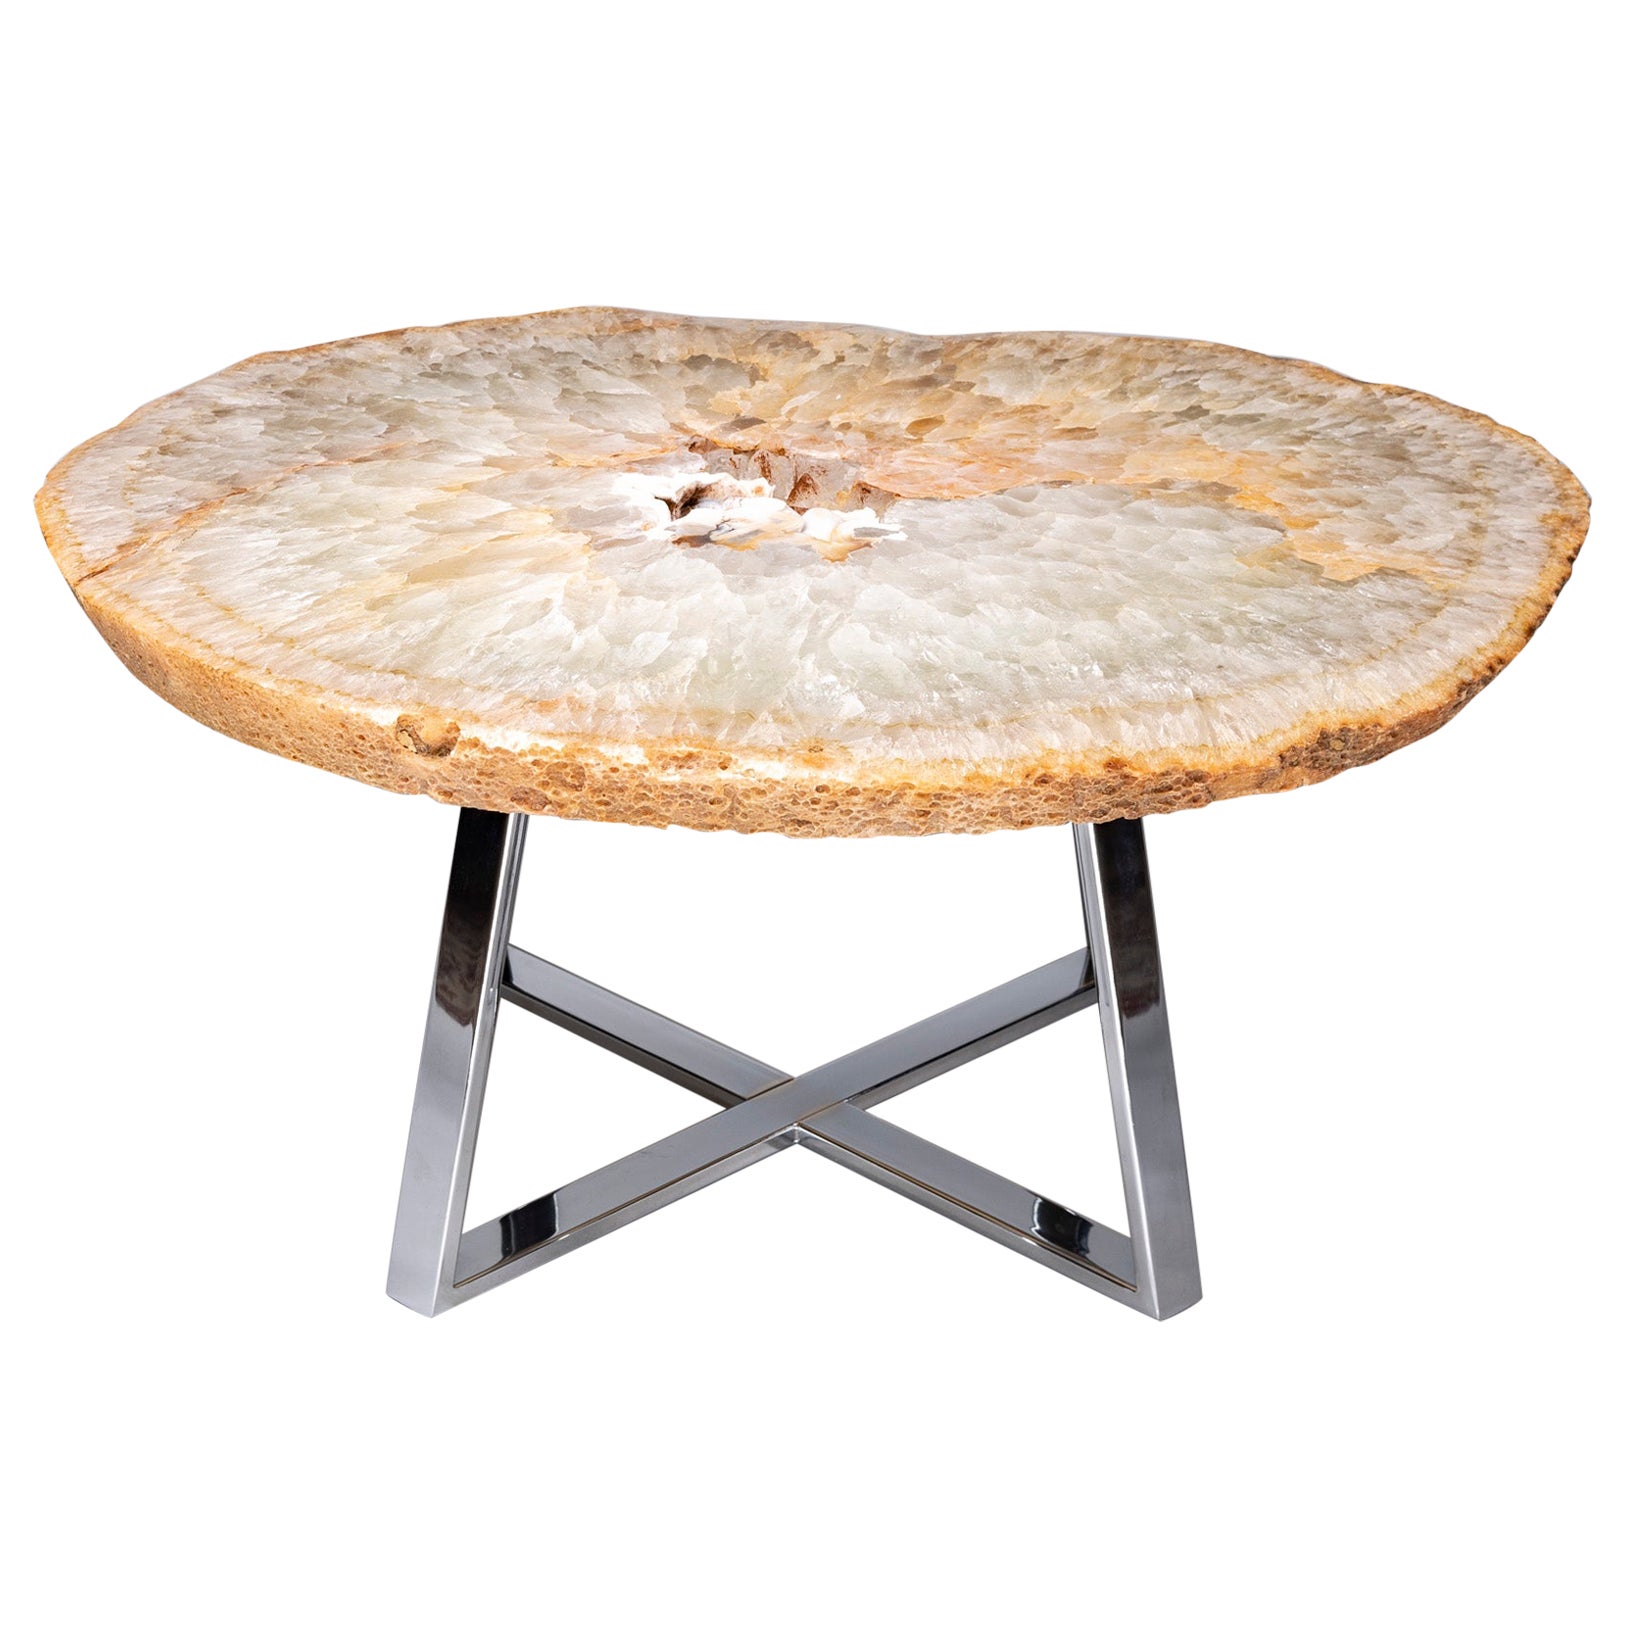 Side or Center Table, Brazilian Agate with Nickel Finish Metal Base